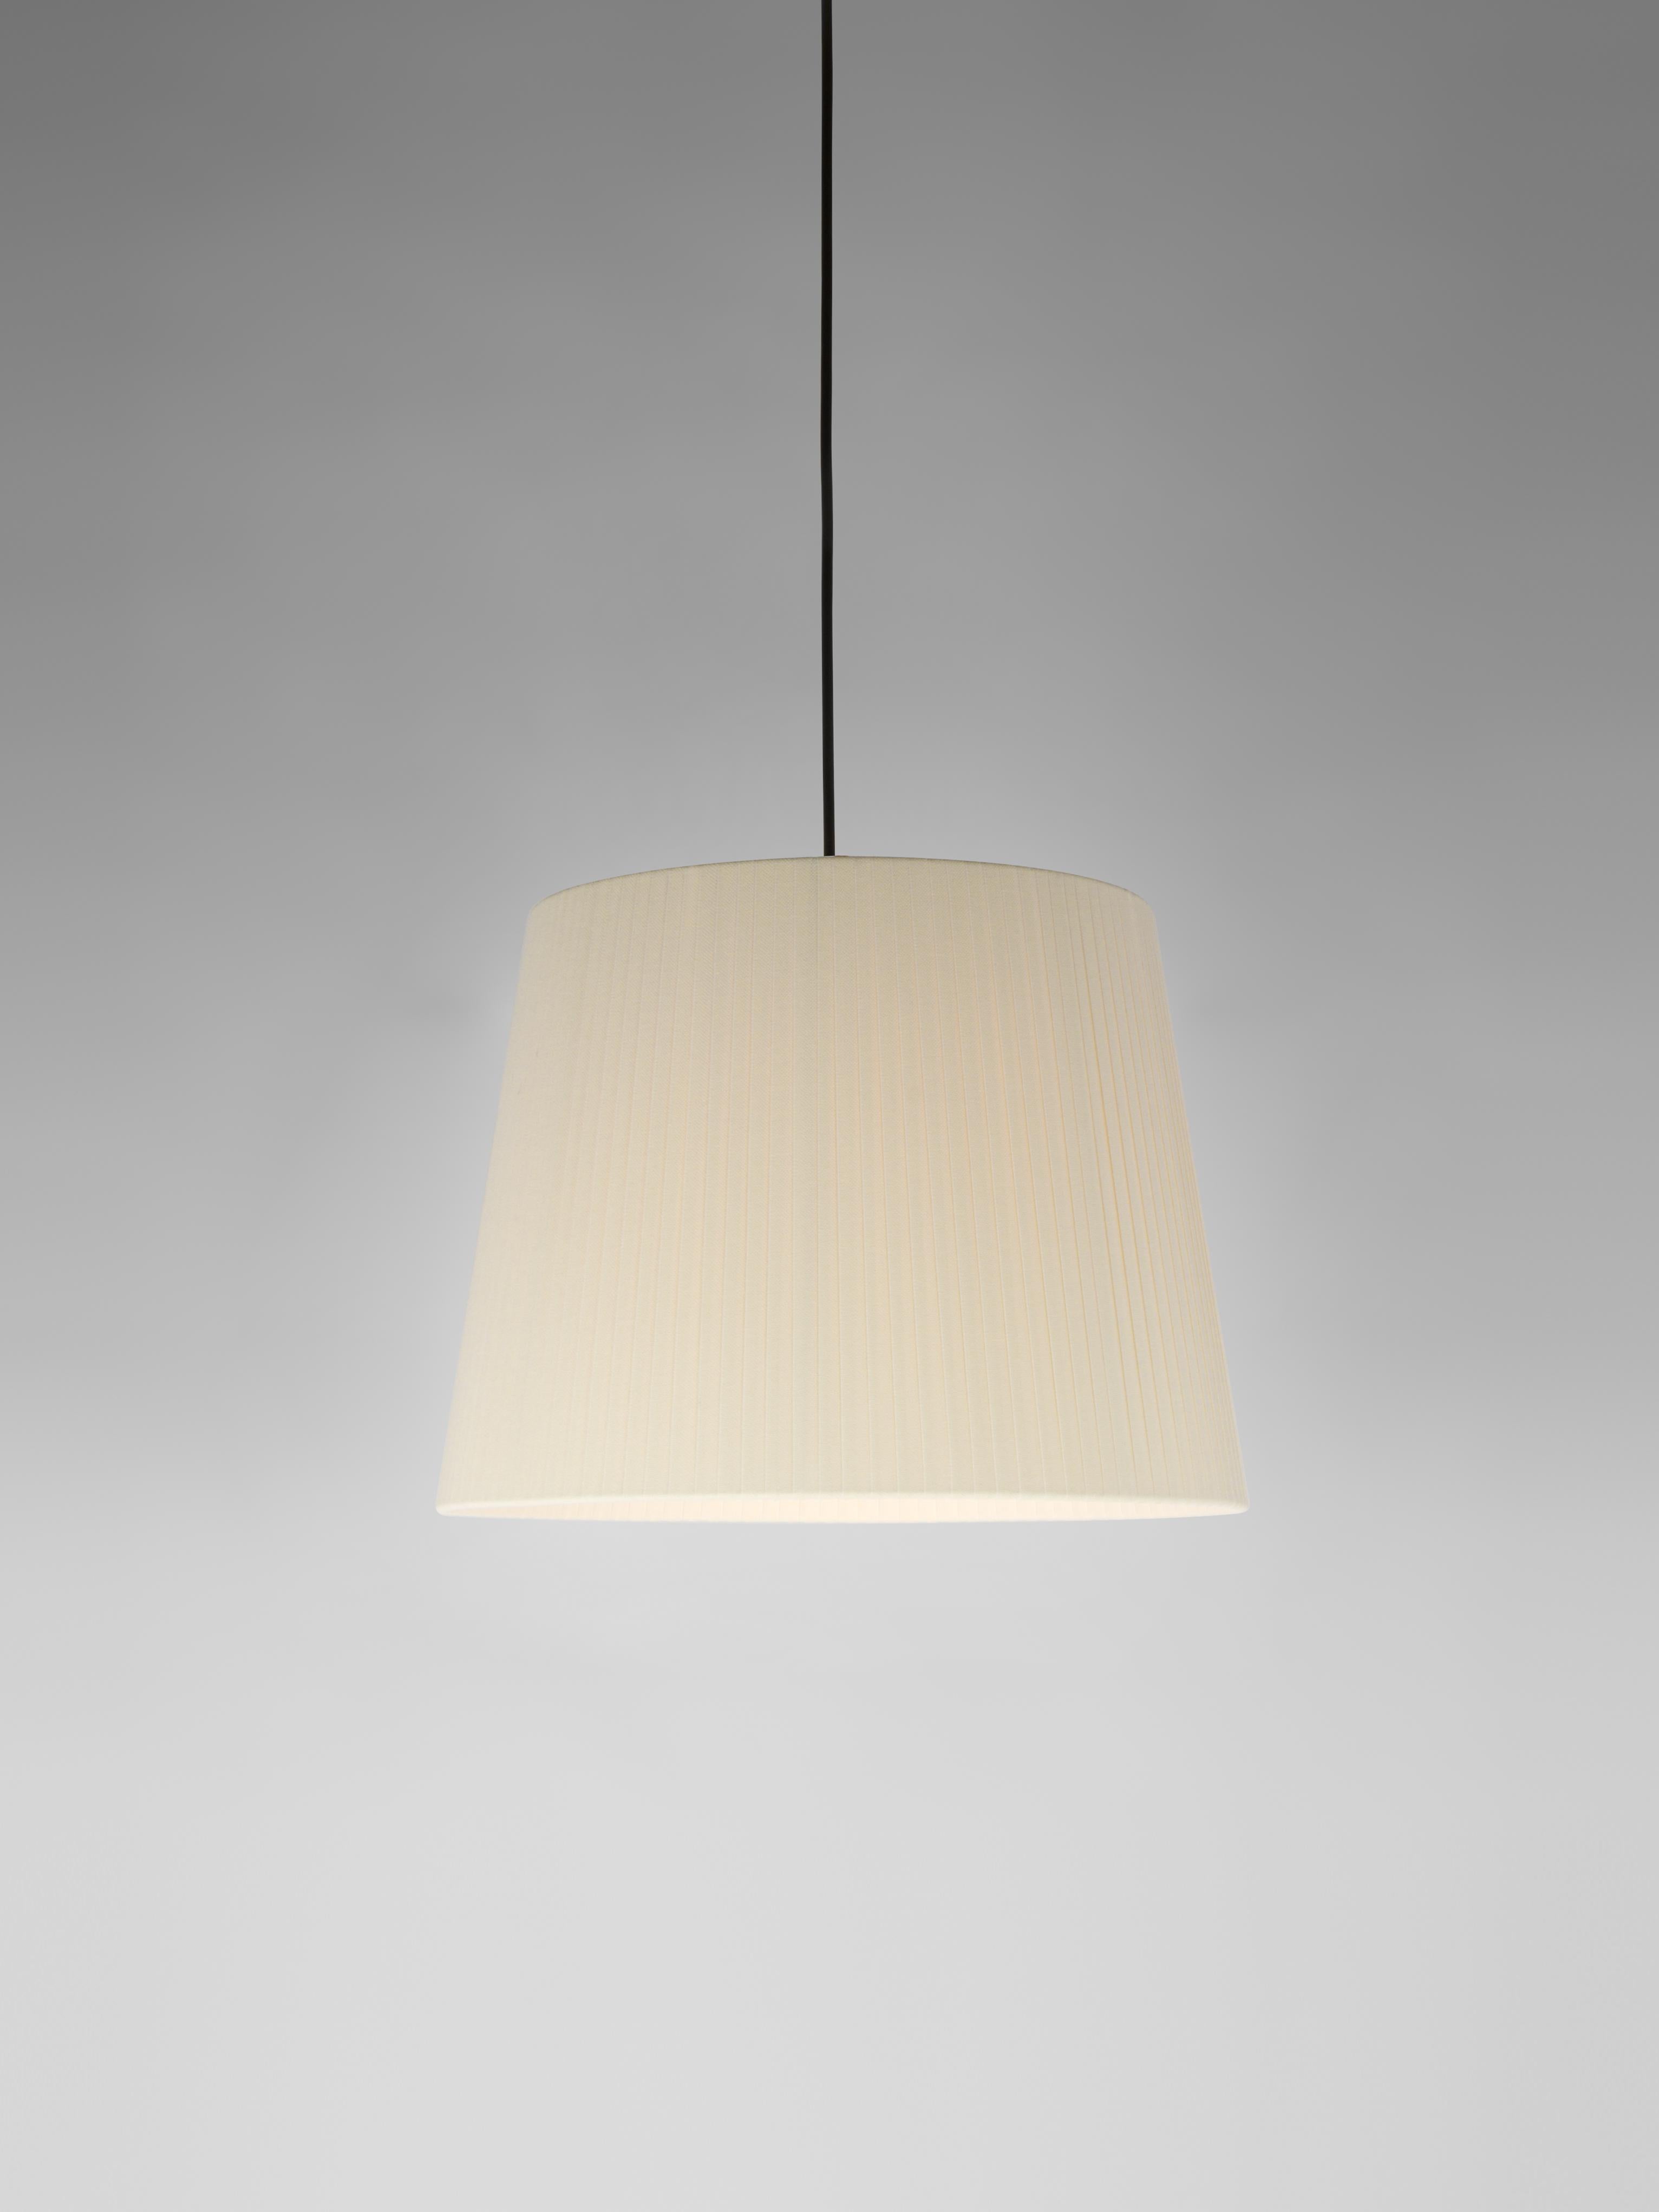 Natural Sísísí Cónicas GT3 pendant lamp by Santa & Cole.
Dimensions: D 36 x H 27 cm.
Materials: Metal, ribbon.
Available in other colors.

The conical shape group has multiple finishes and sizes. It consists of four sizes: PT1, MT1, GT1 and